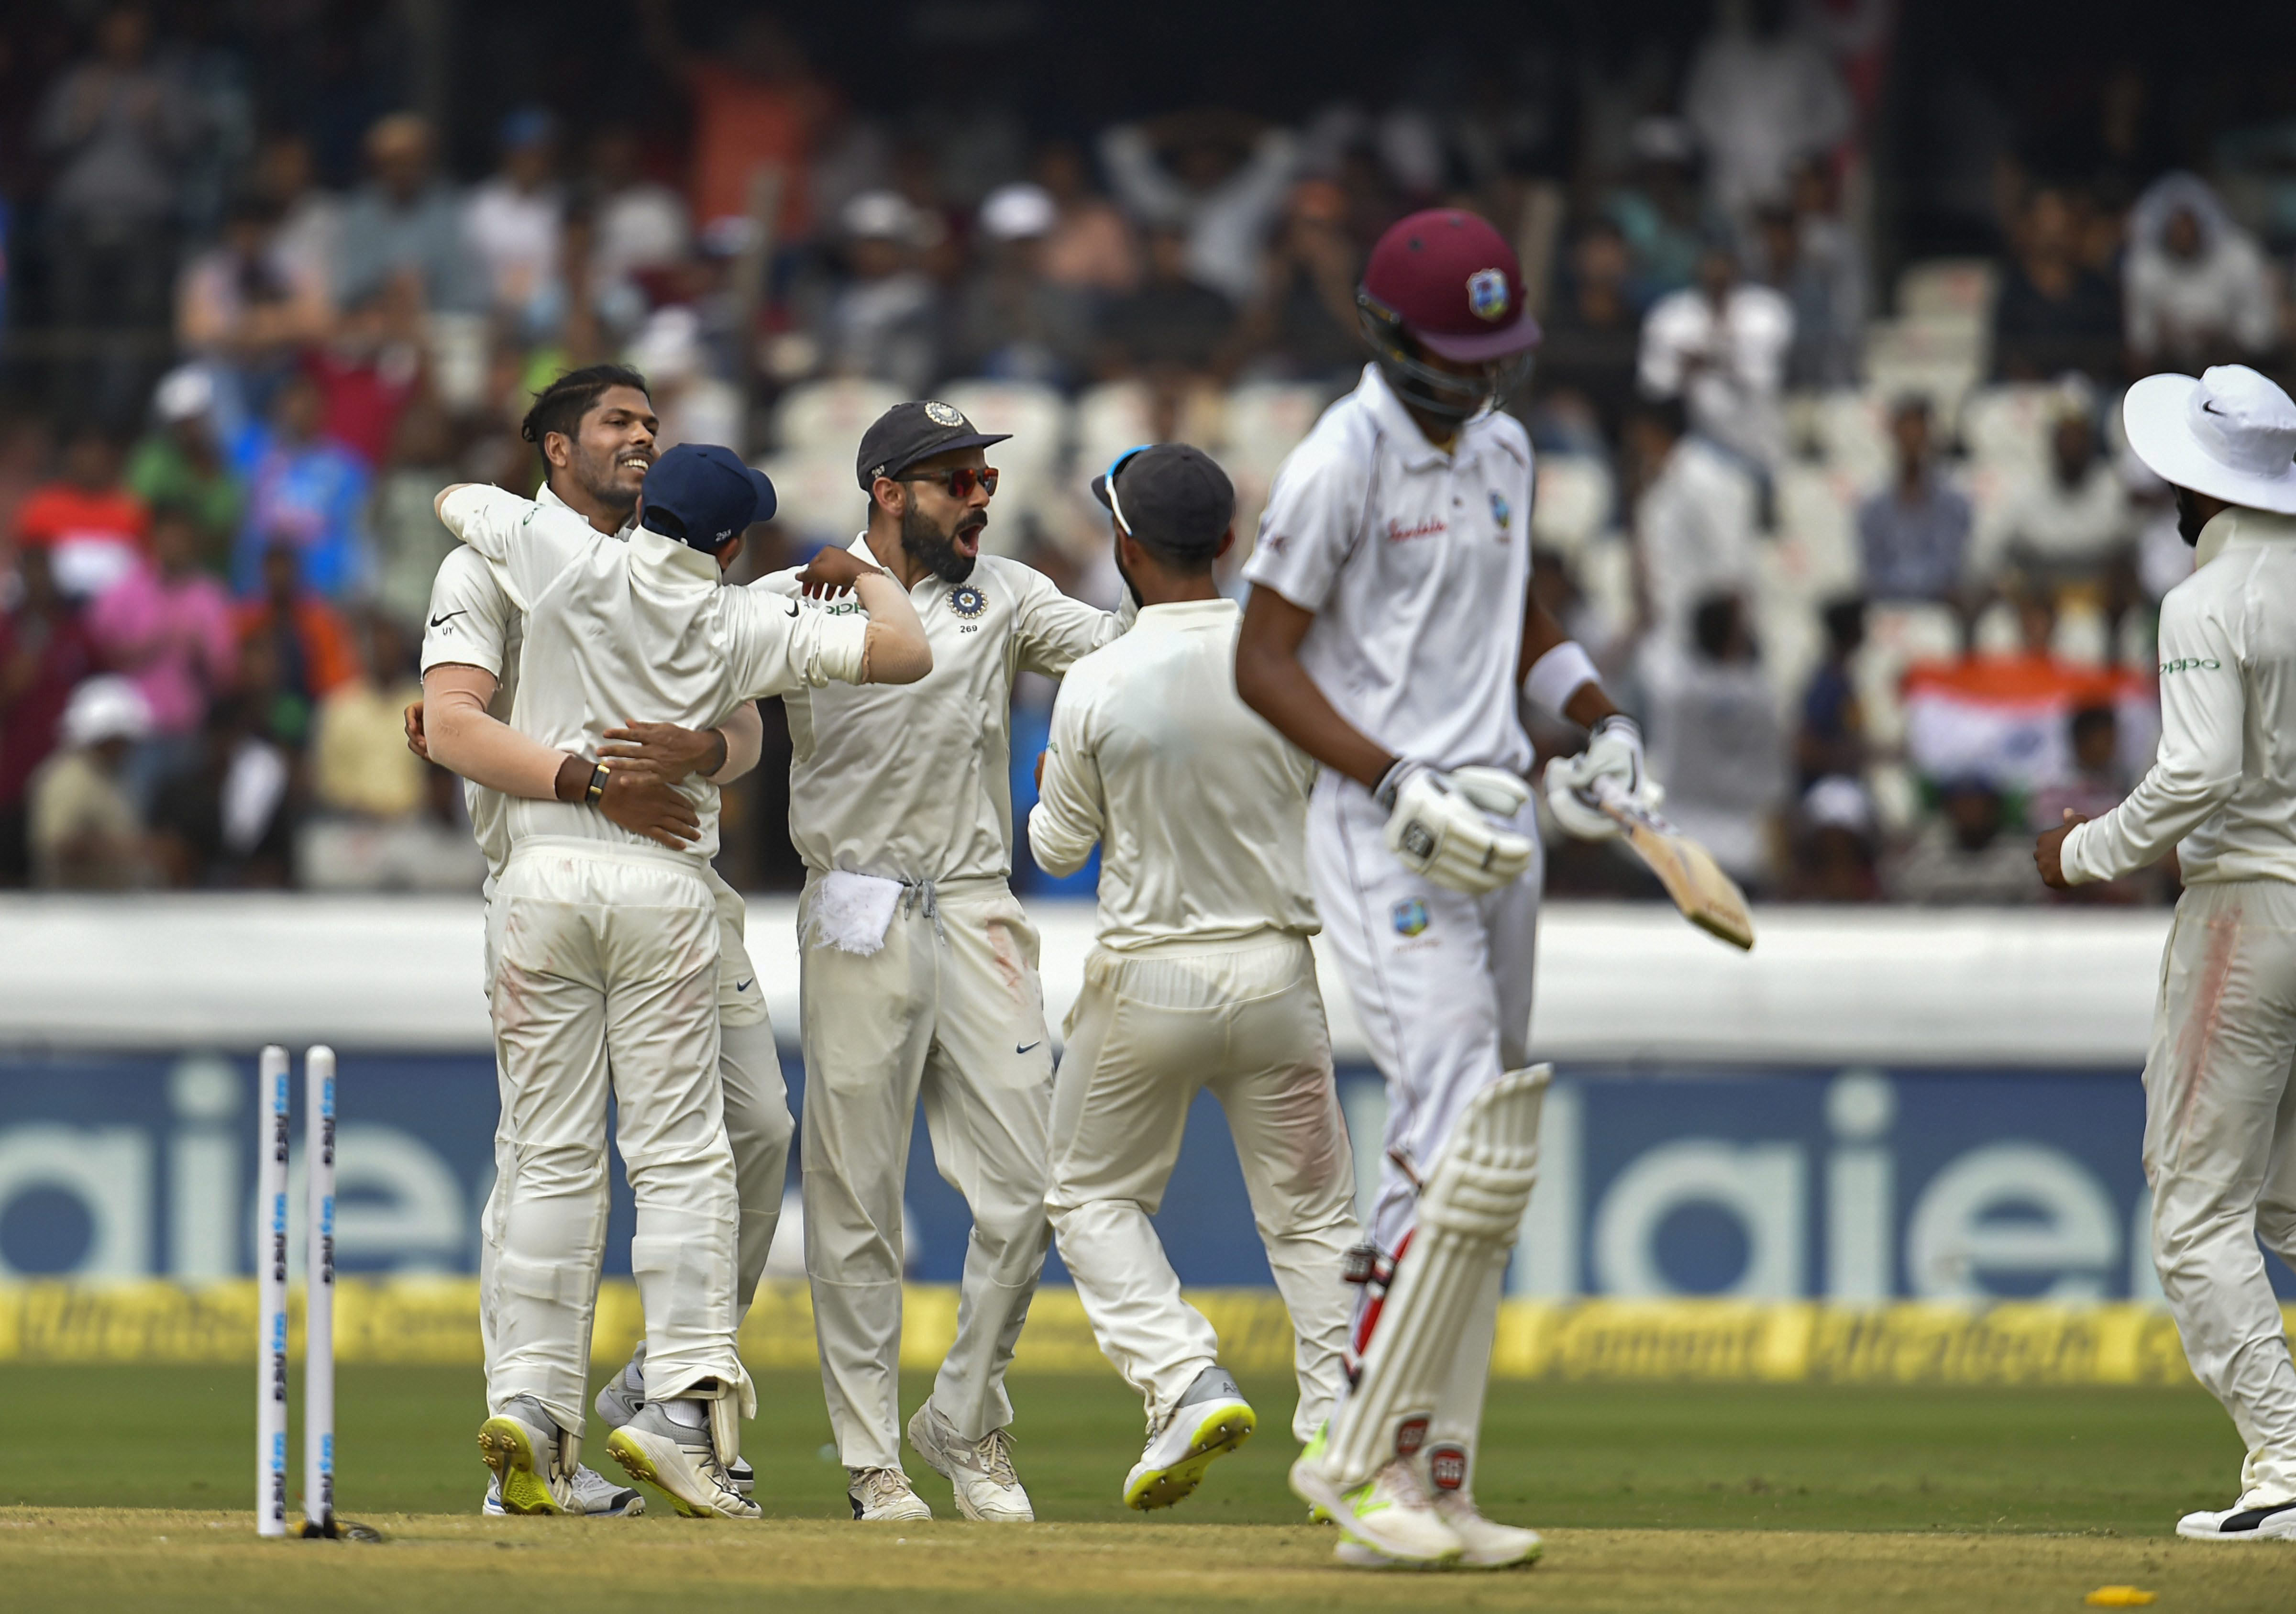 India vs West Indies 2nd Test, Day 3 Live cricket score, updates and pictures as it happens in